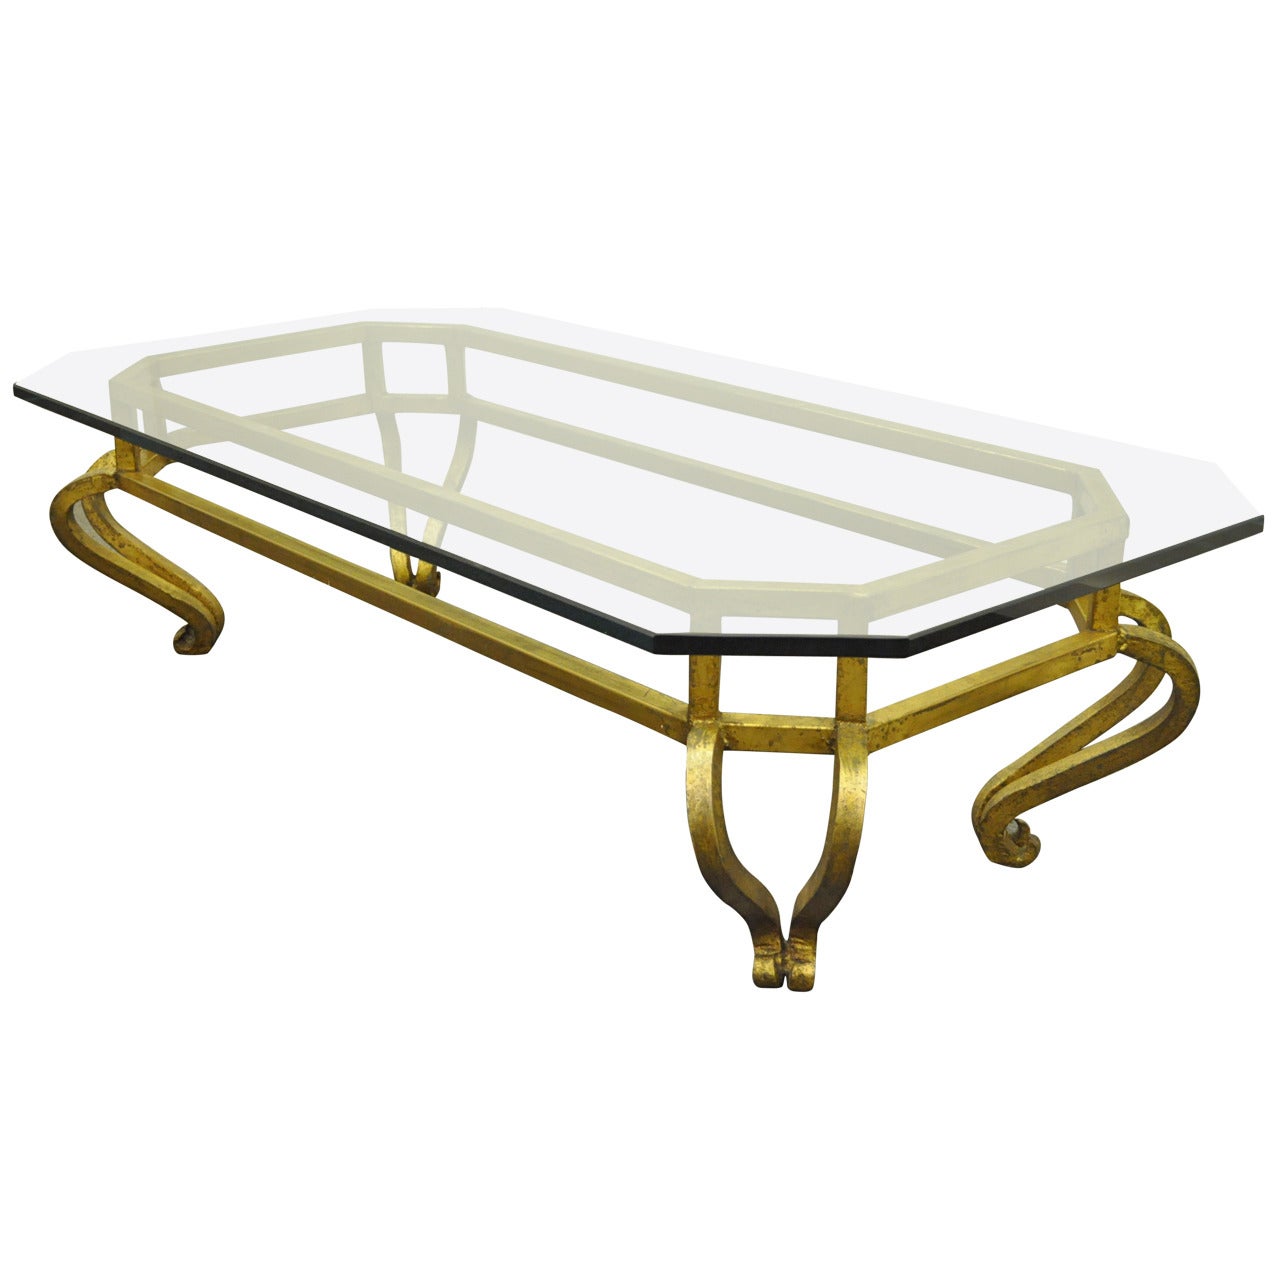 Vintage Arturo Pani Style Gold Gilt Iron & Glass Hollywood Regency Coffee Table  For Sale